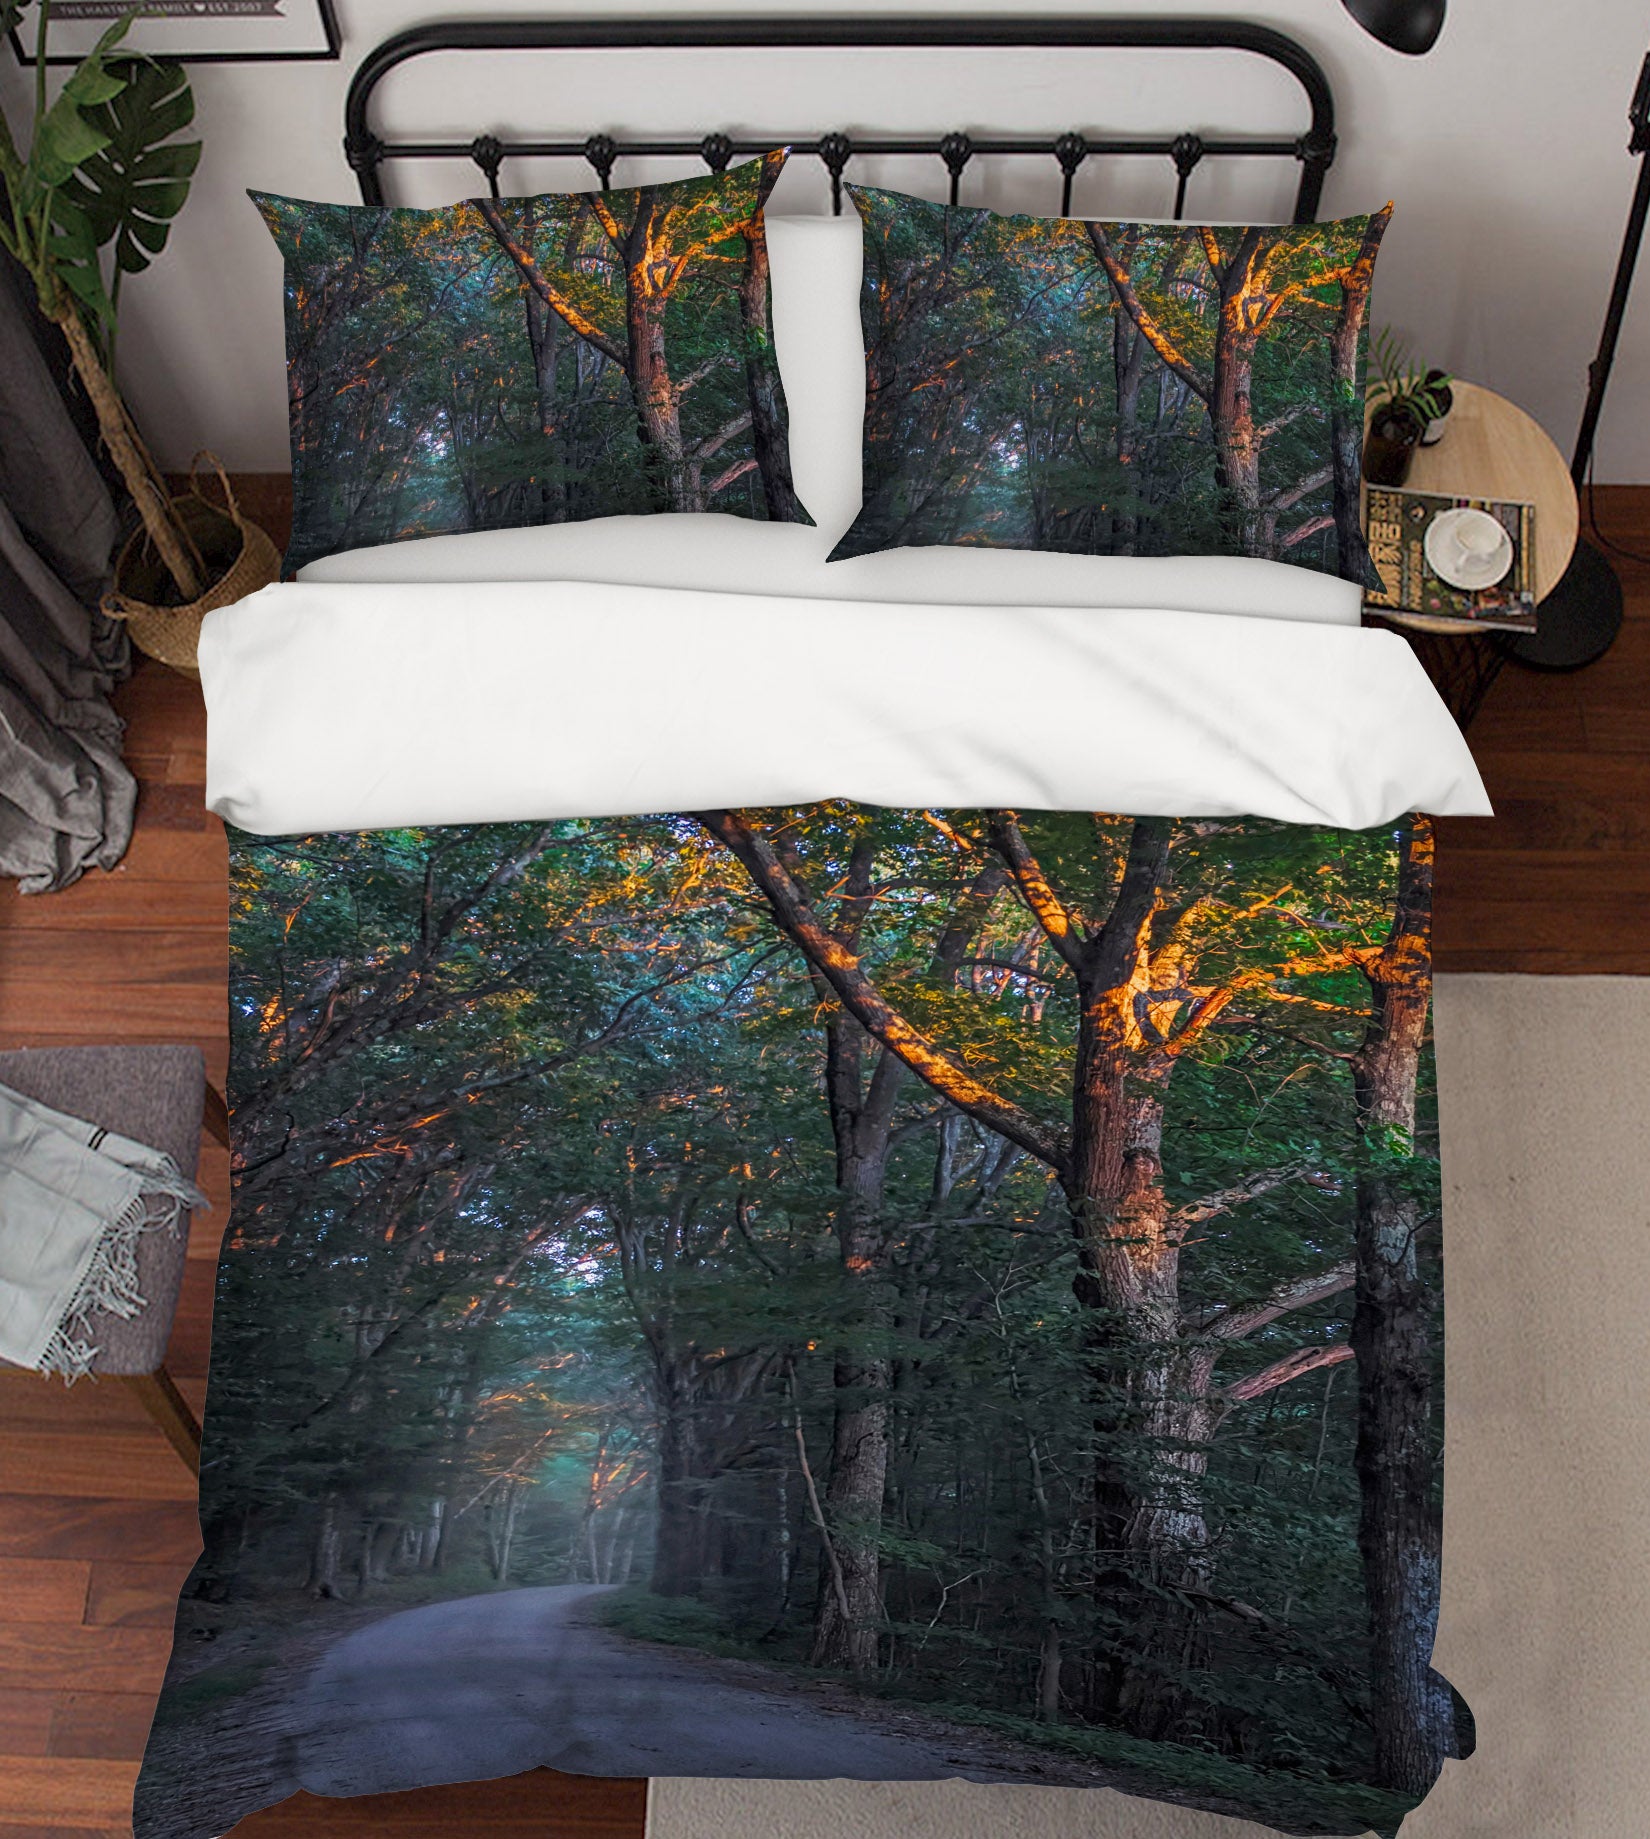 3D Forest 86031 Jerry LoFaro bedding Bed Pillowcases Quilt